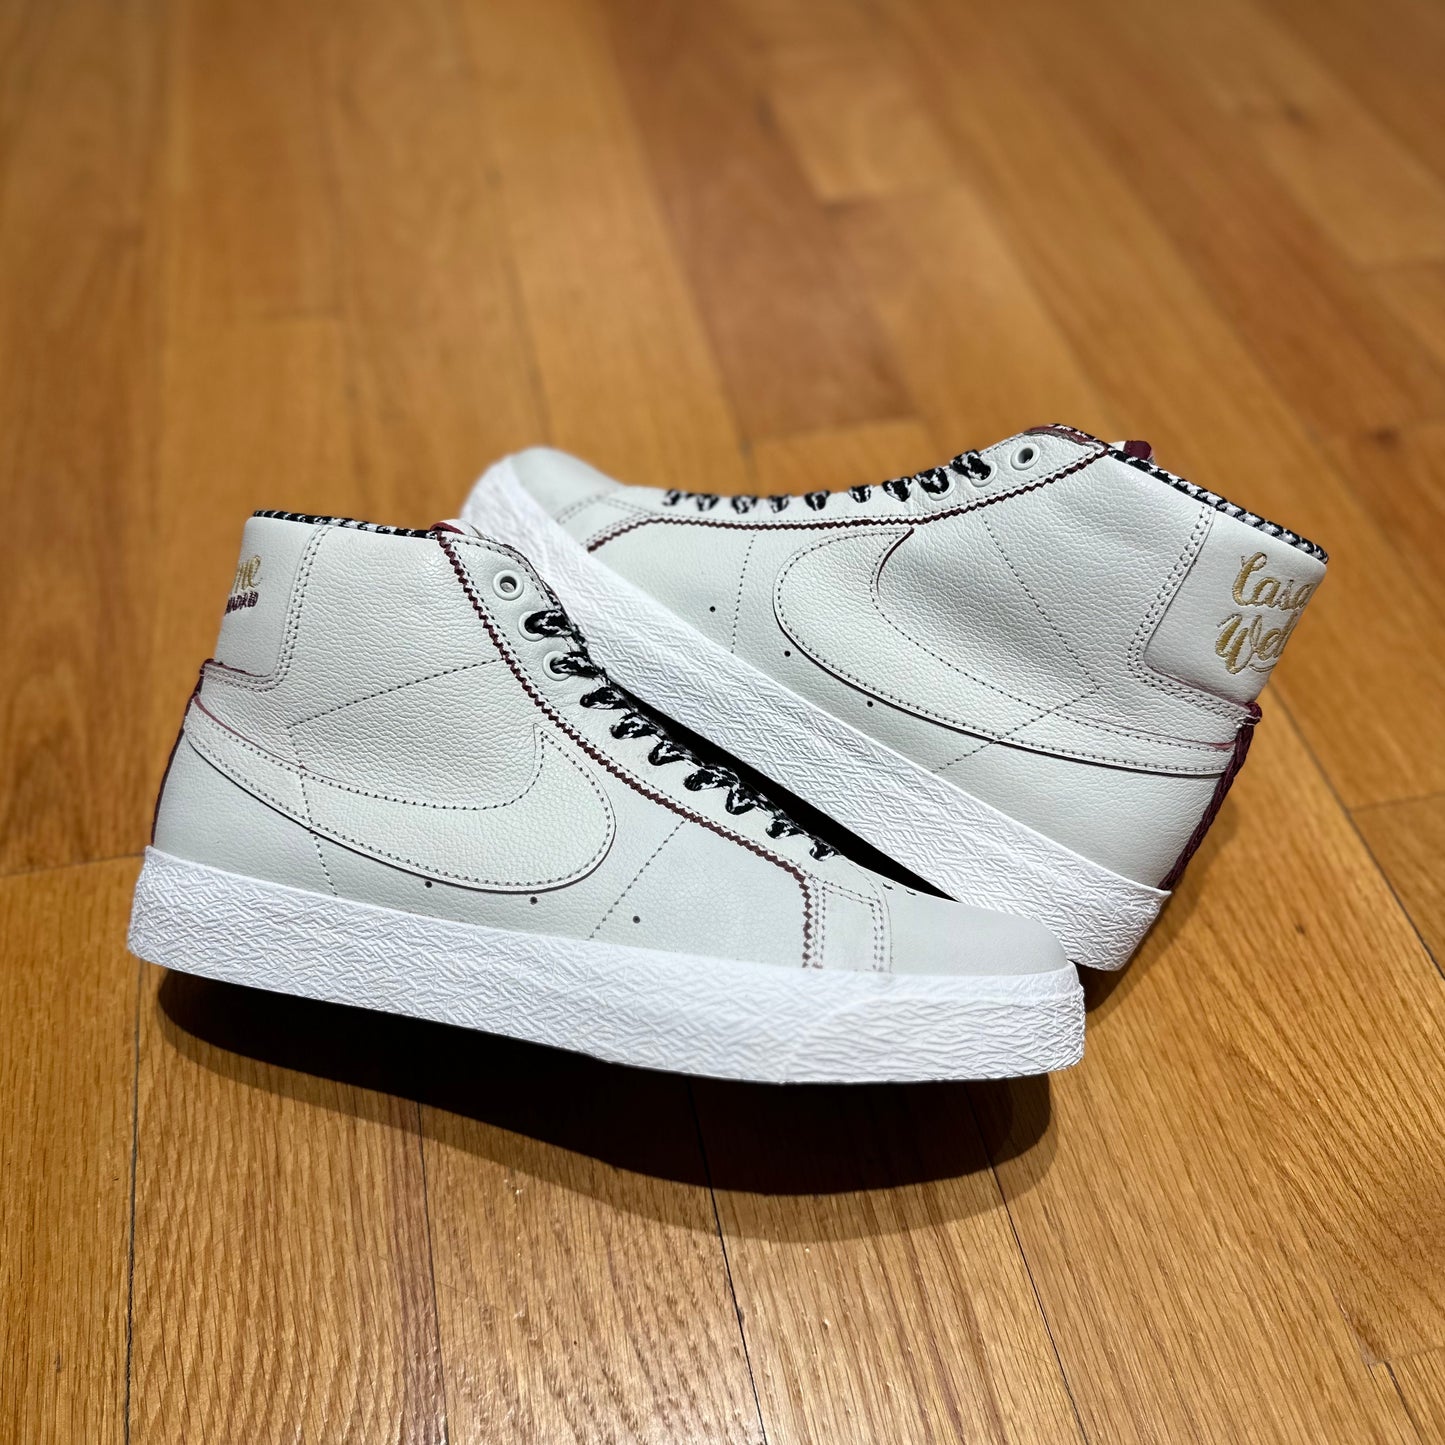 ZOOM BLAZER MID QS (WELCOME STORE)